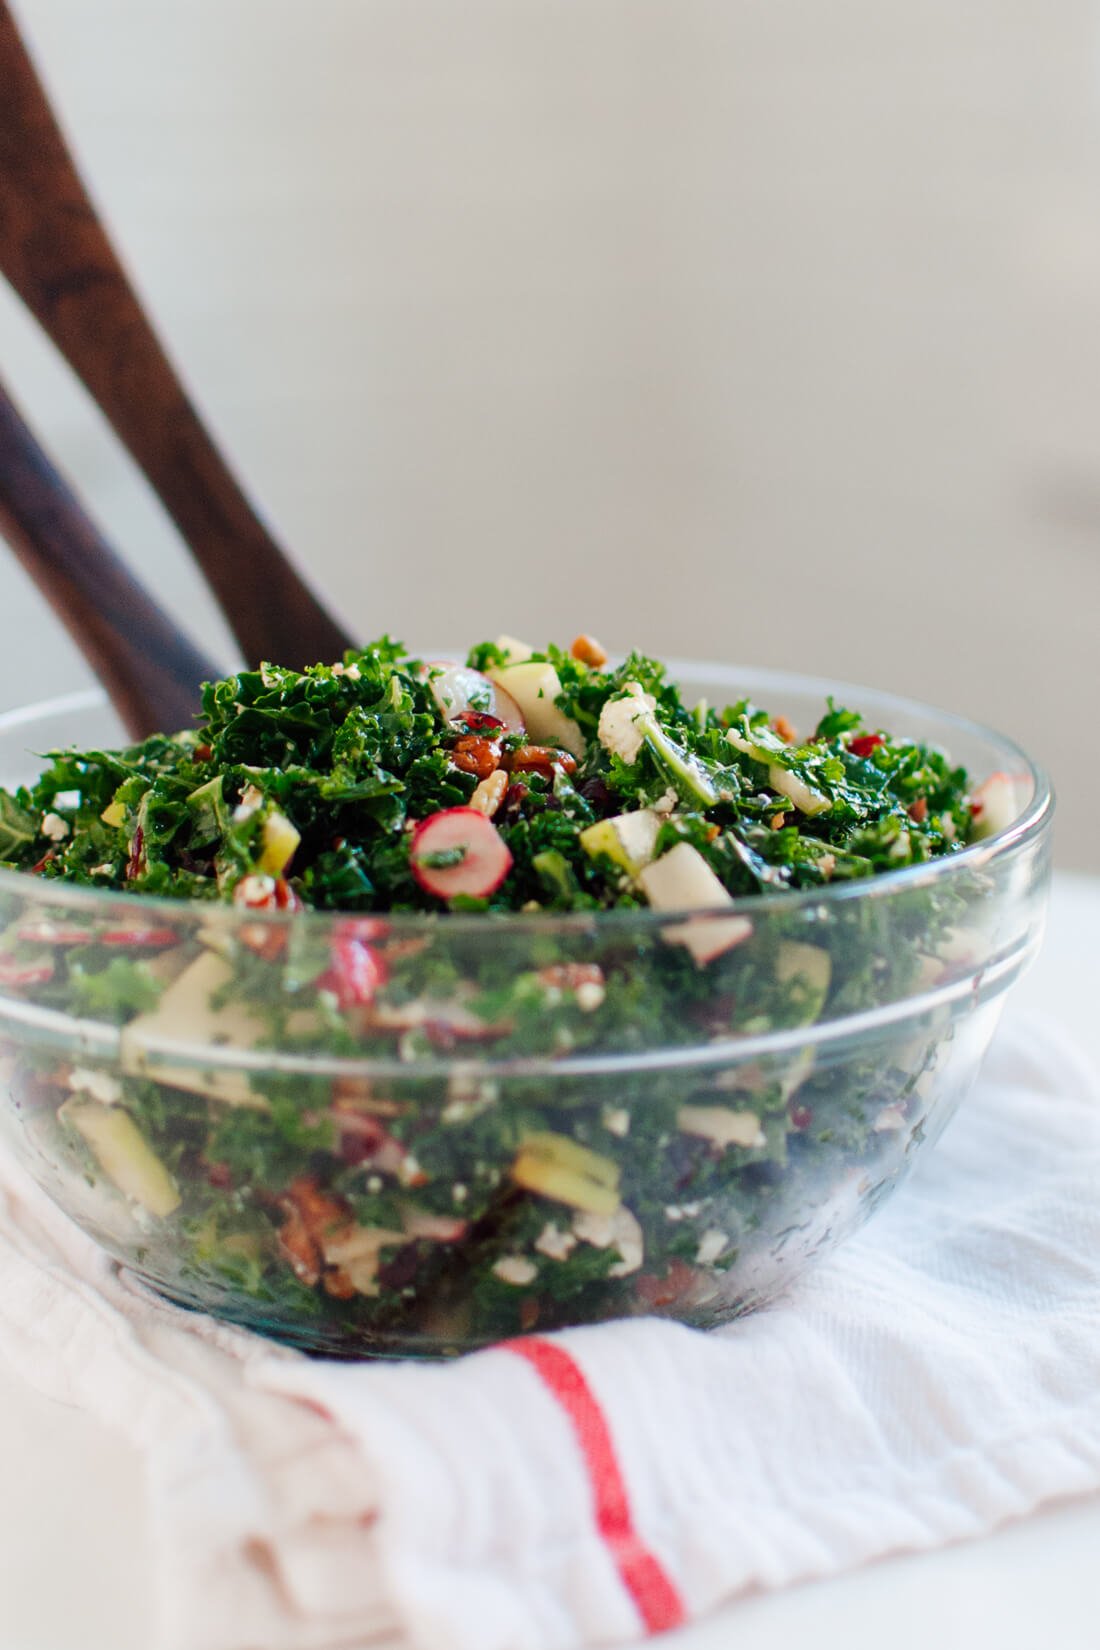 Fresh kale salad with sliced apples, dried cranberries and pecans in a zippy honey-mustard dressing